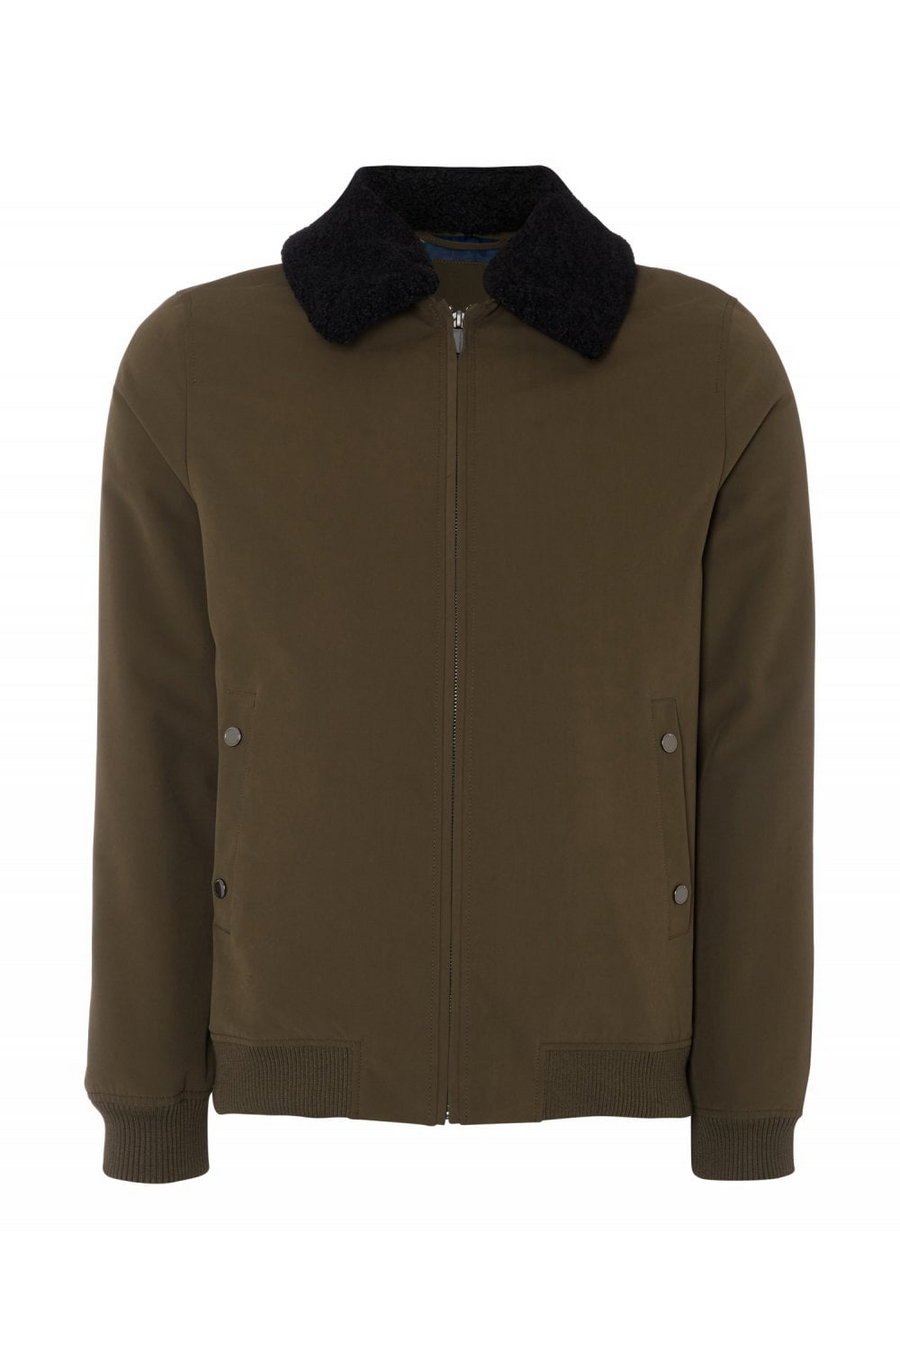 Buy the Remus Uomo Fur Collar Bomber Jacket Khaki at Intro. Spend £50 for free UK delivery. Official stockists. We ship worldwide.